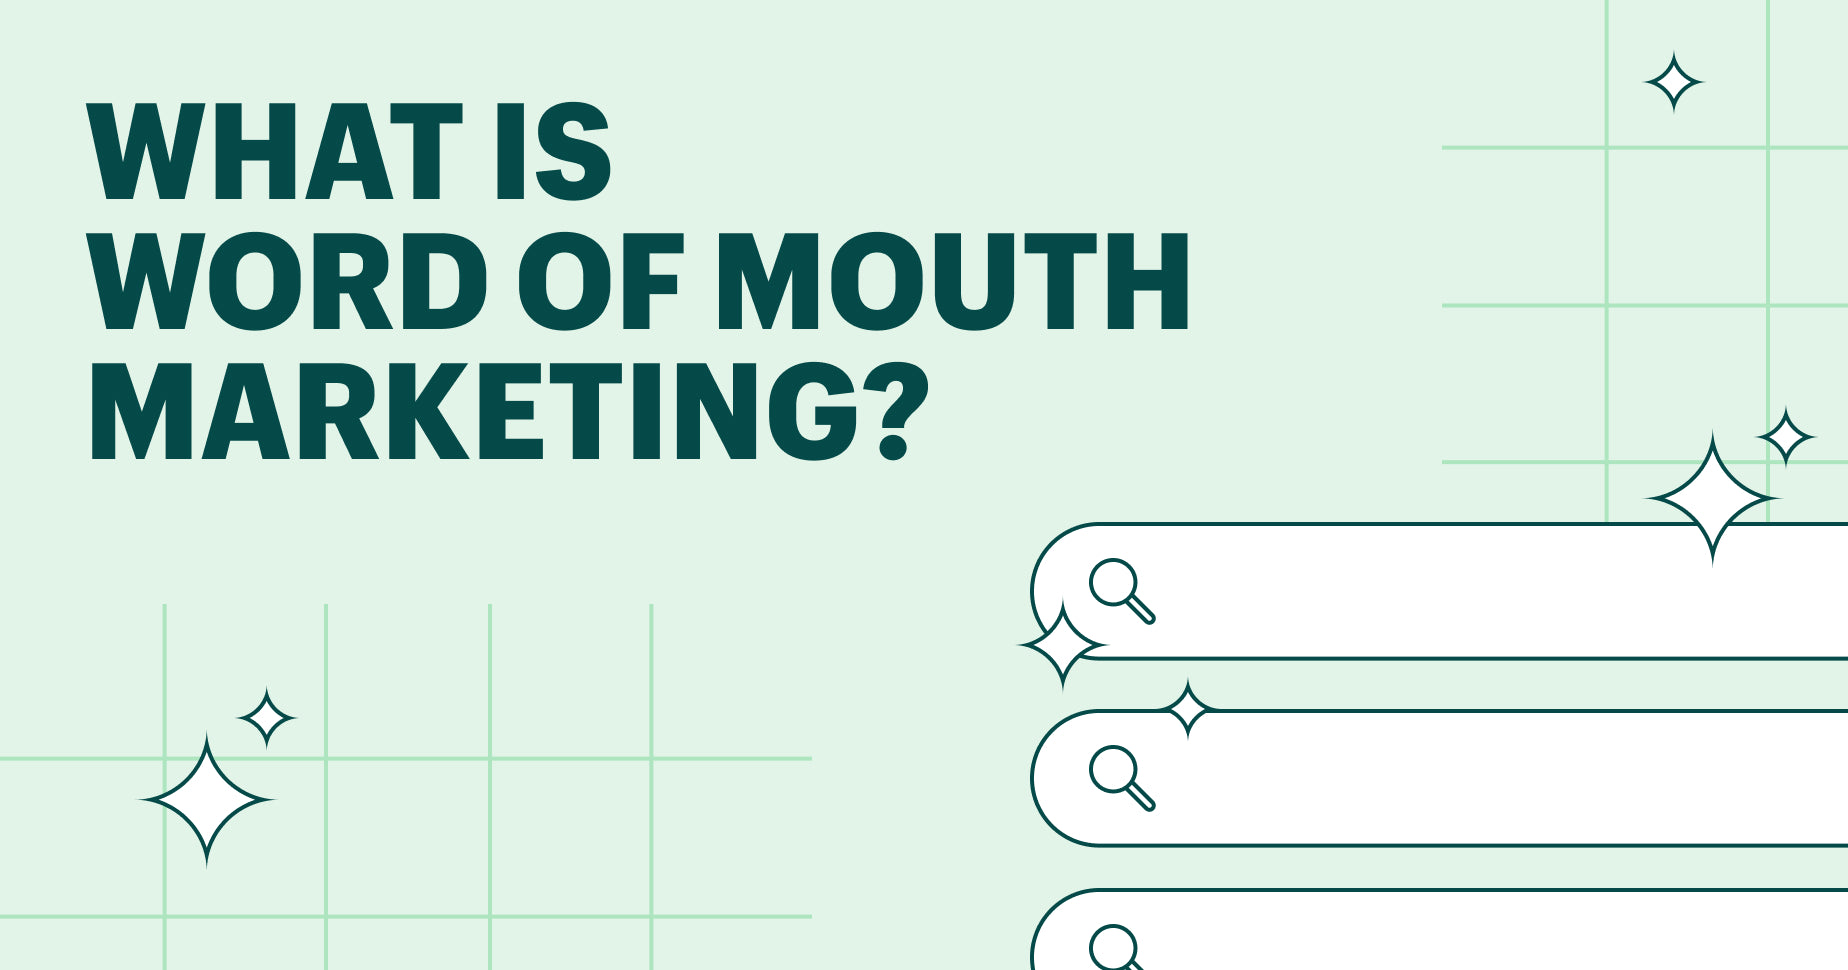 What is word of mouth marketing?